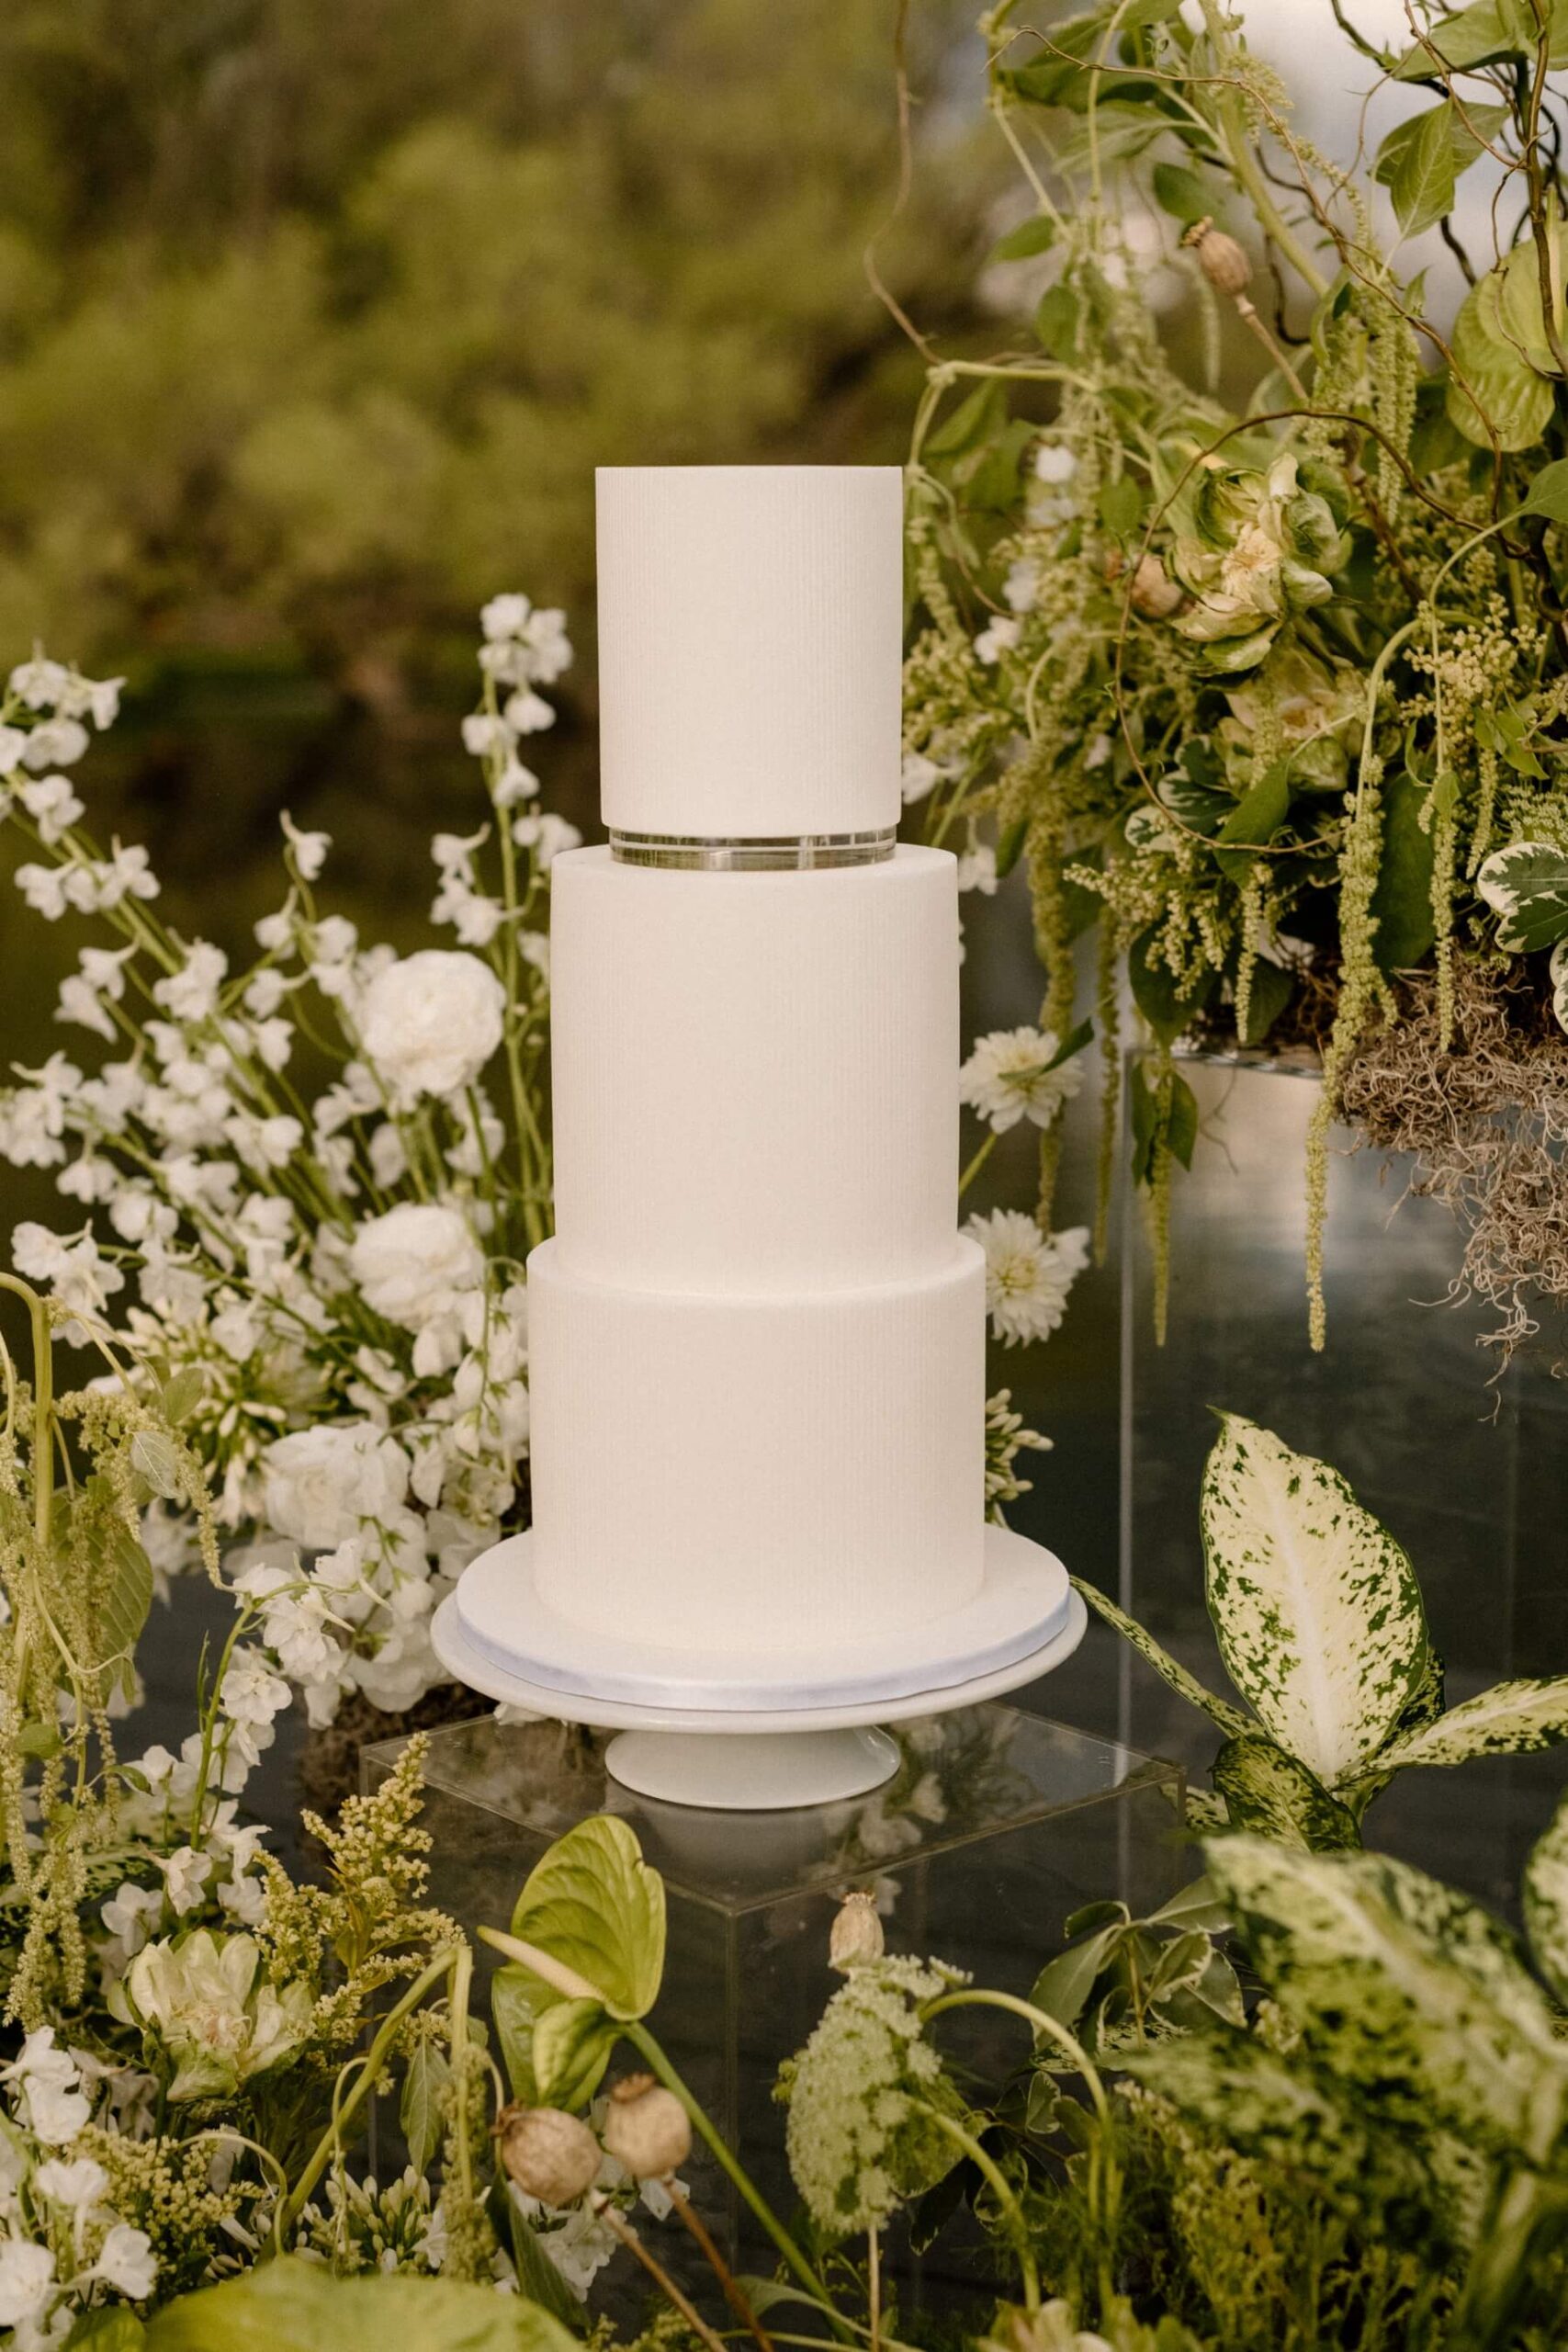 Three tier white wedding cake with silver band